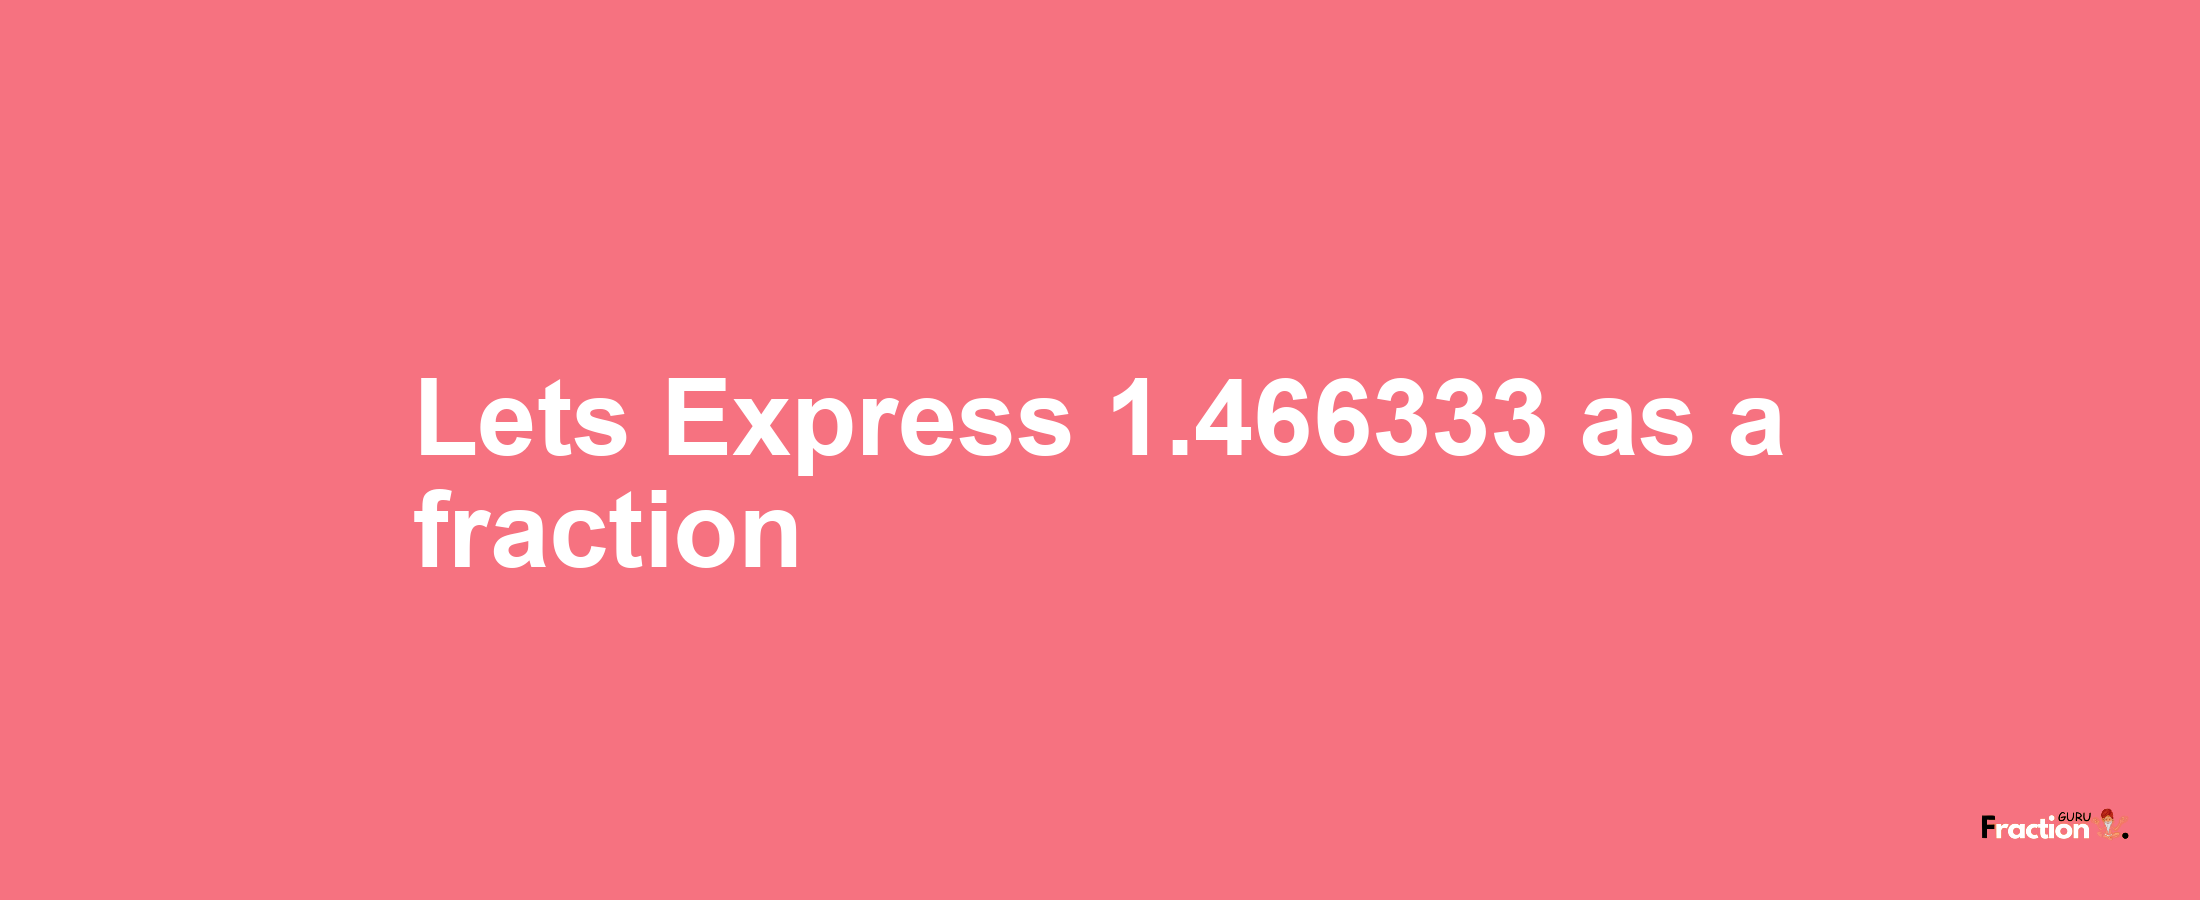 Lets Express 1.466333 as afraction